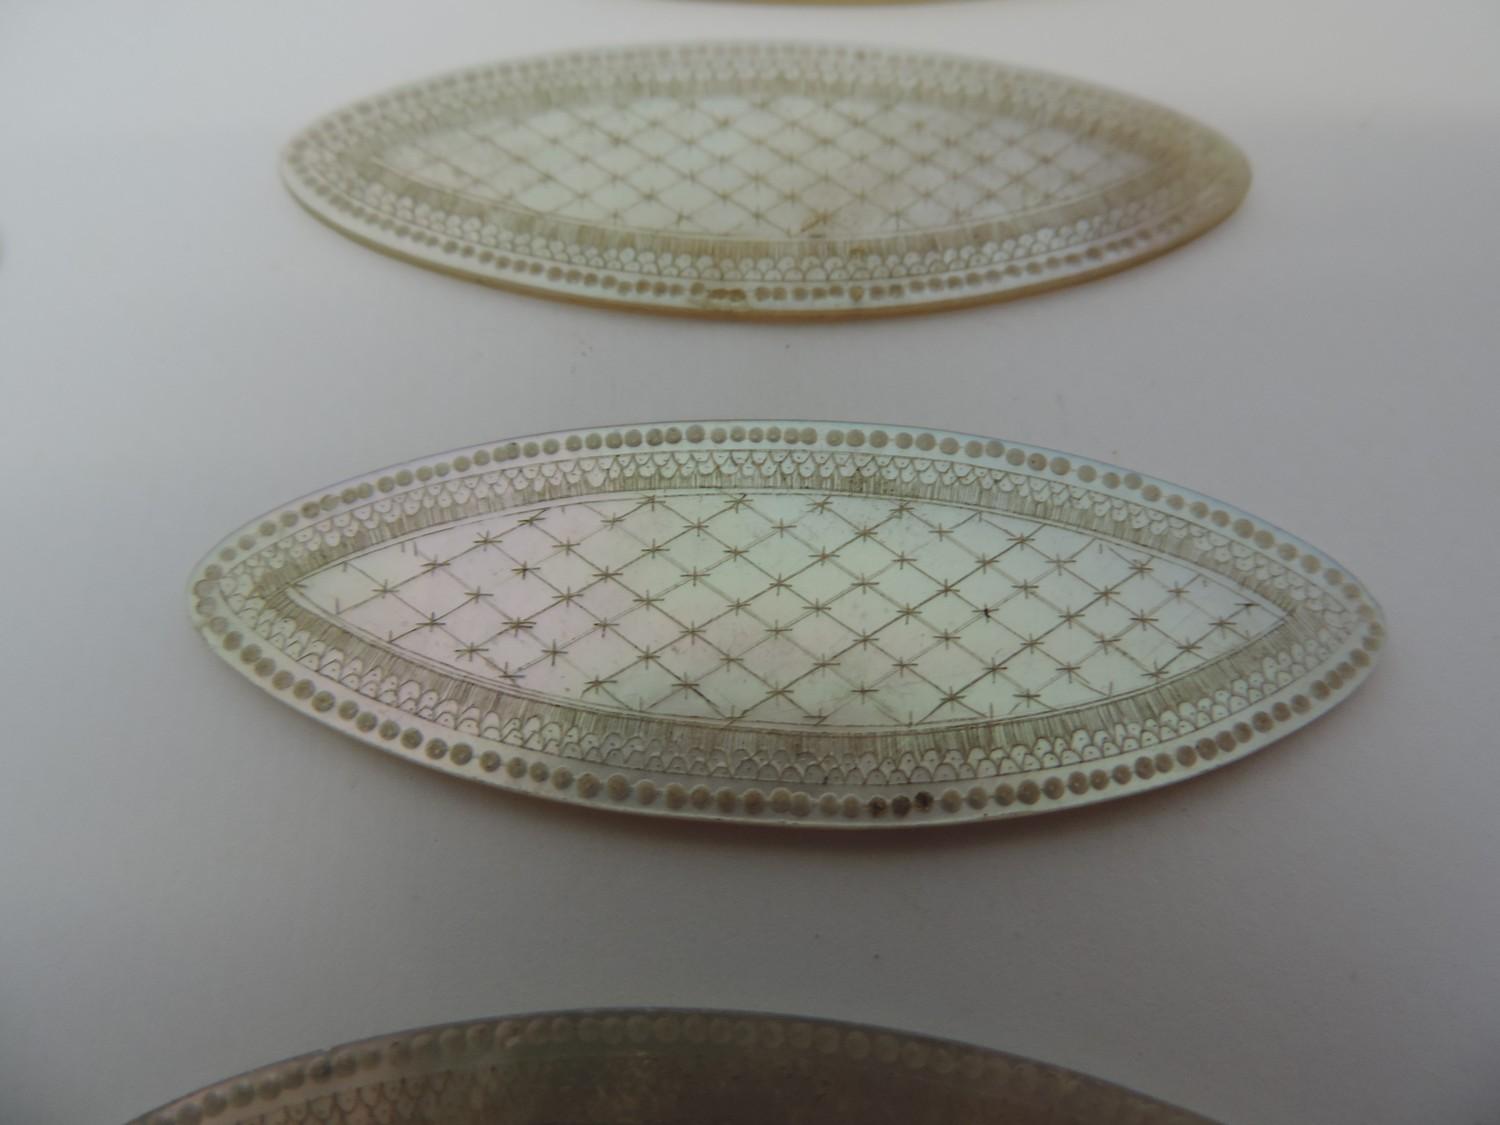 Large Quantity of Chinese Mother of Pearl Gaming Counters - Image 5 of 6